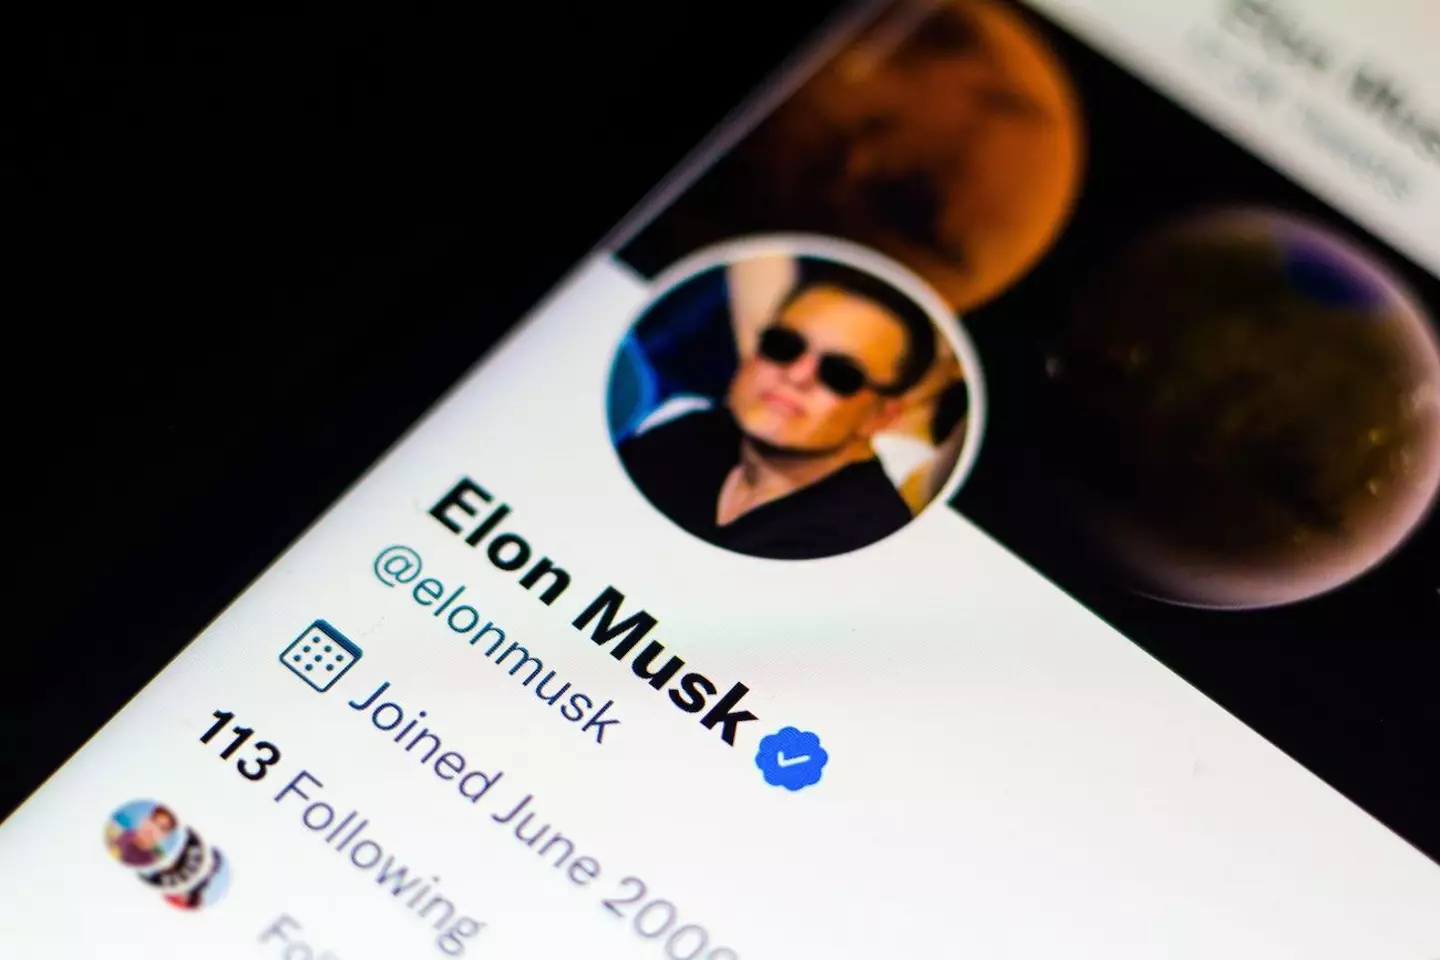 Elon Musk has issued Twitter co-founder Jack Dorsey a subpoena ahead of his $44bn (£37bn) legal fight.